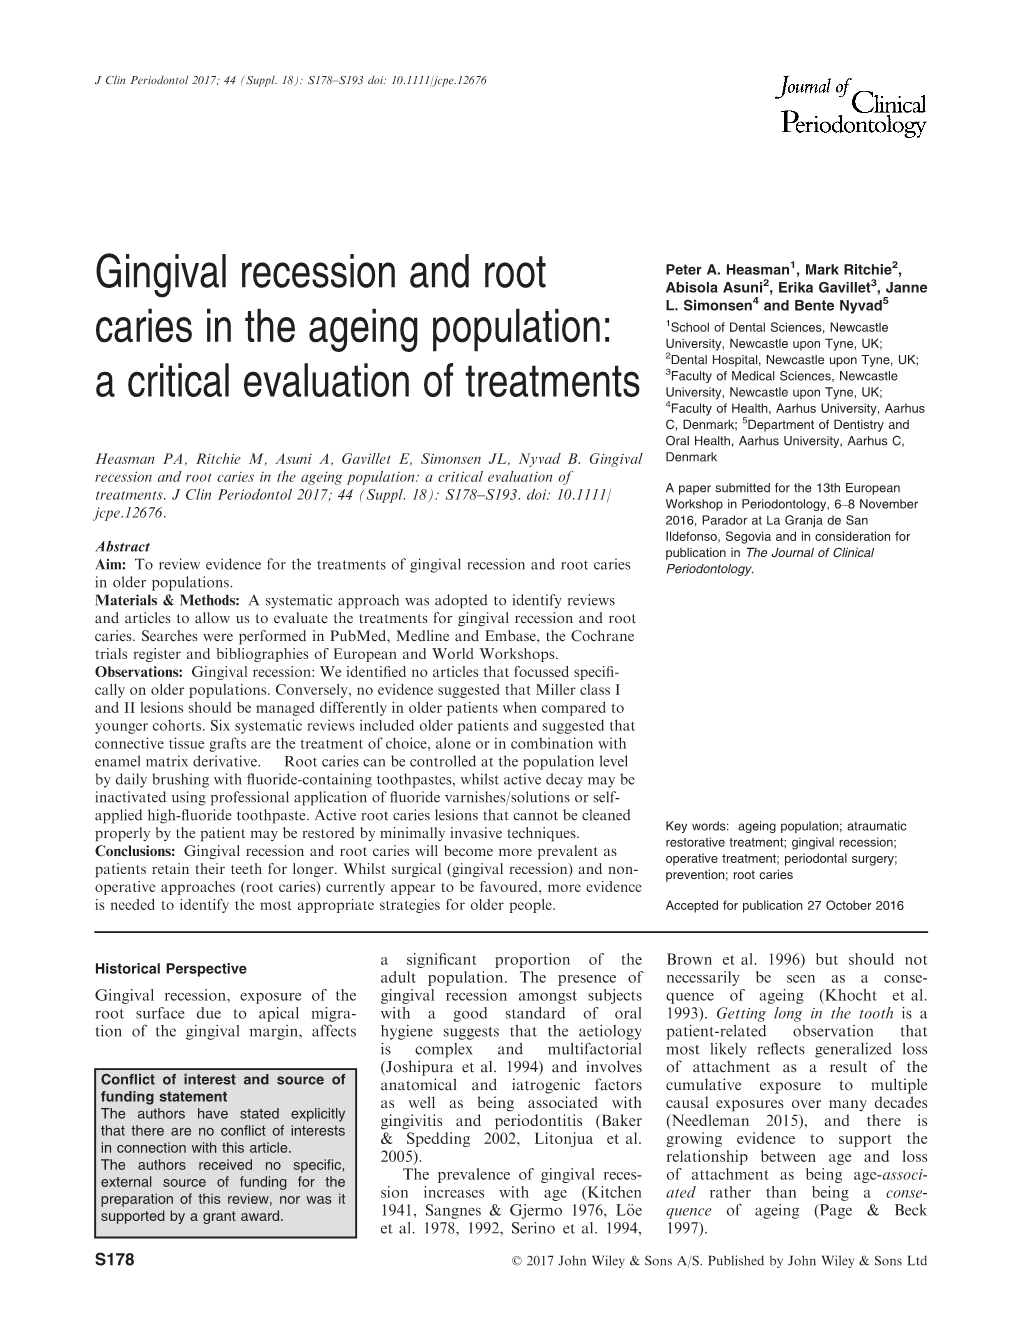 Gingival Recession and Root Caries in the Ageing Population